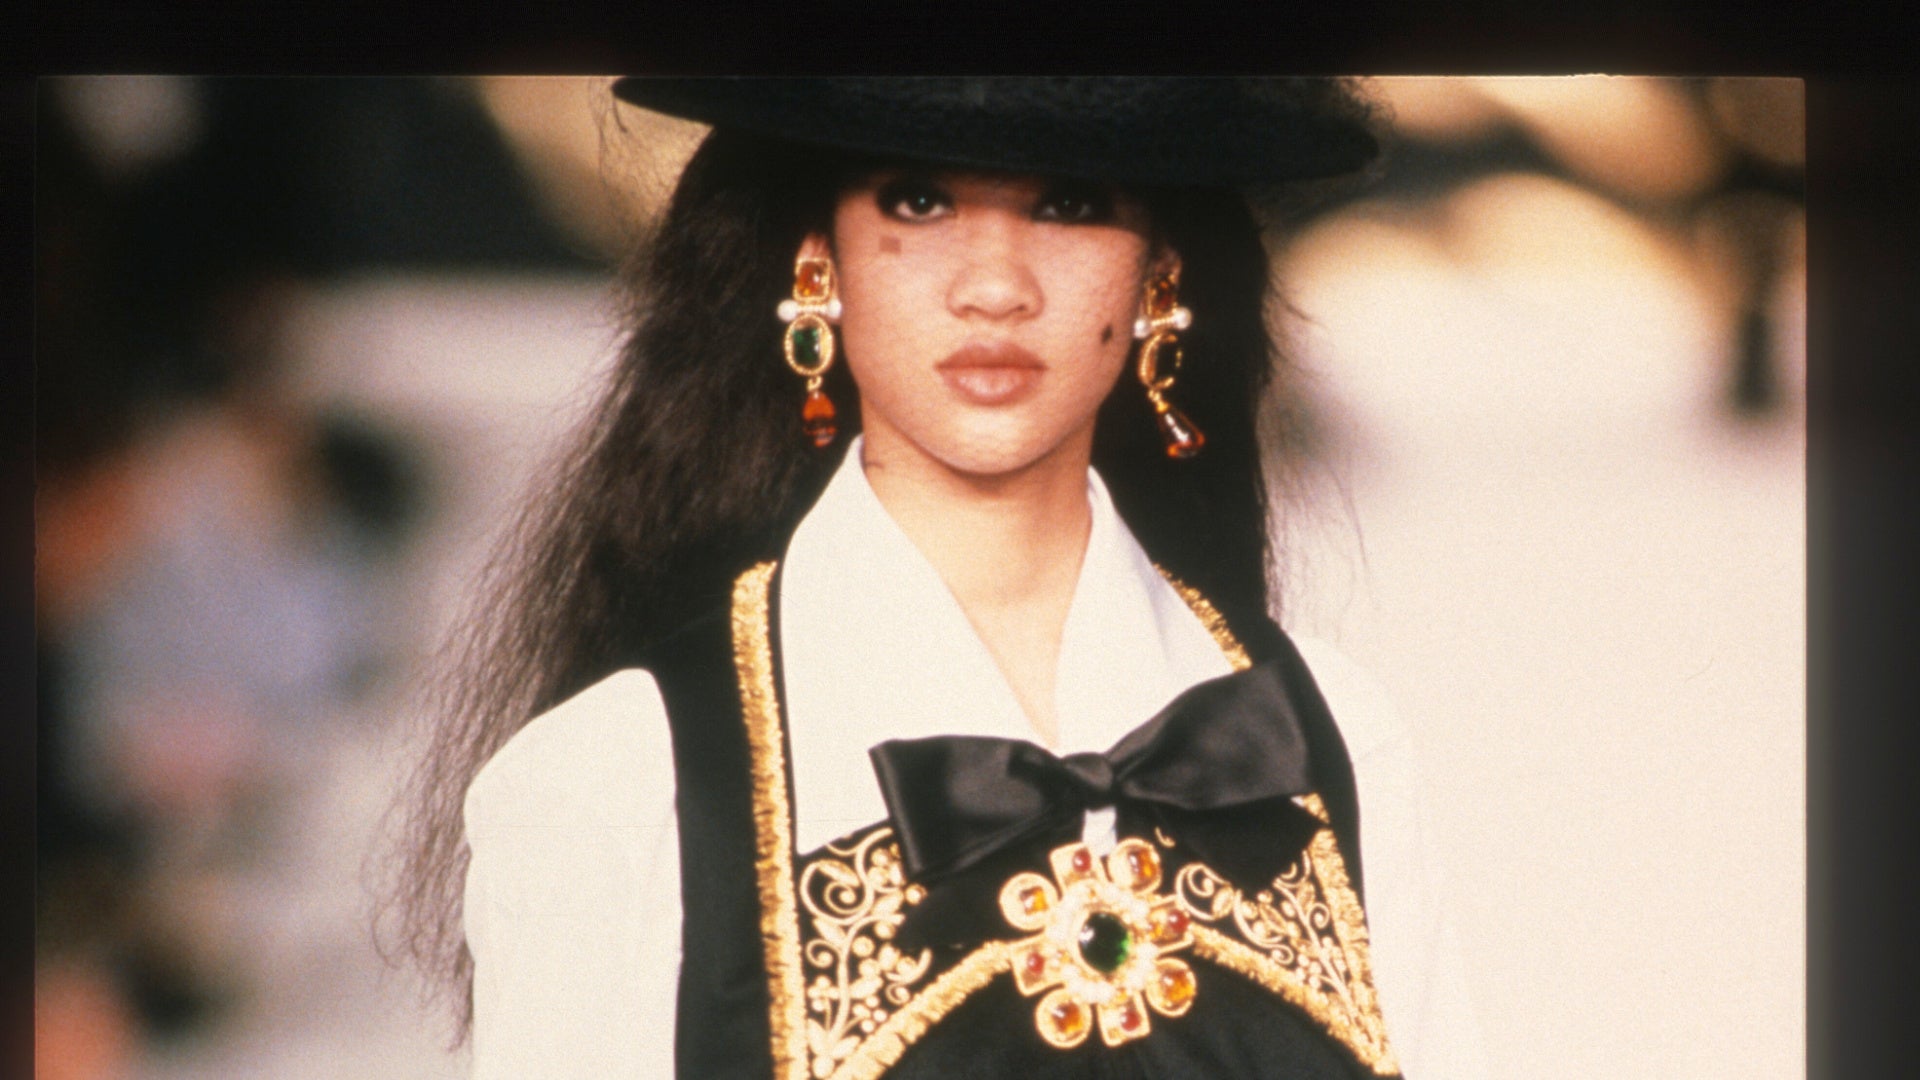 Kimora Lee Simmons Is An OG Chanel Muse, And Let's Not Forget It